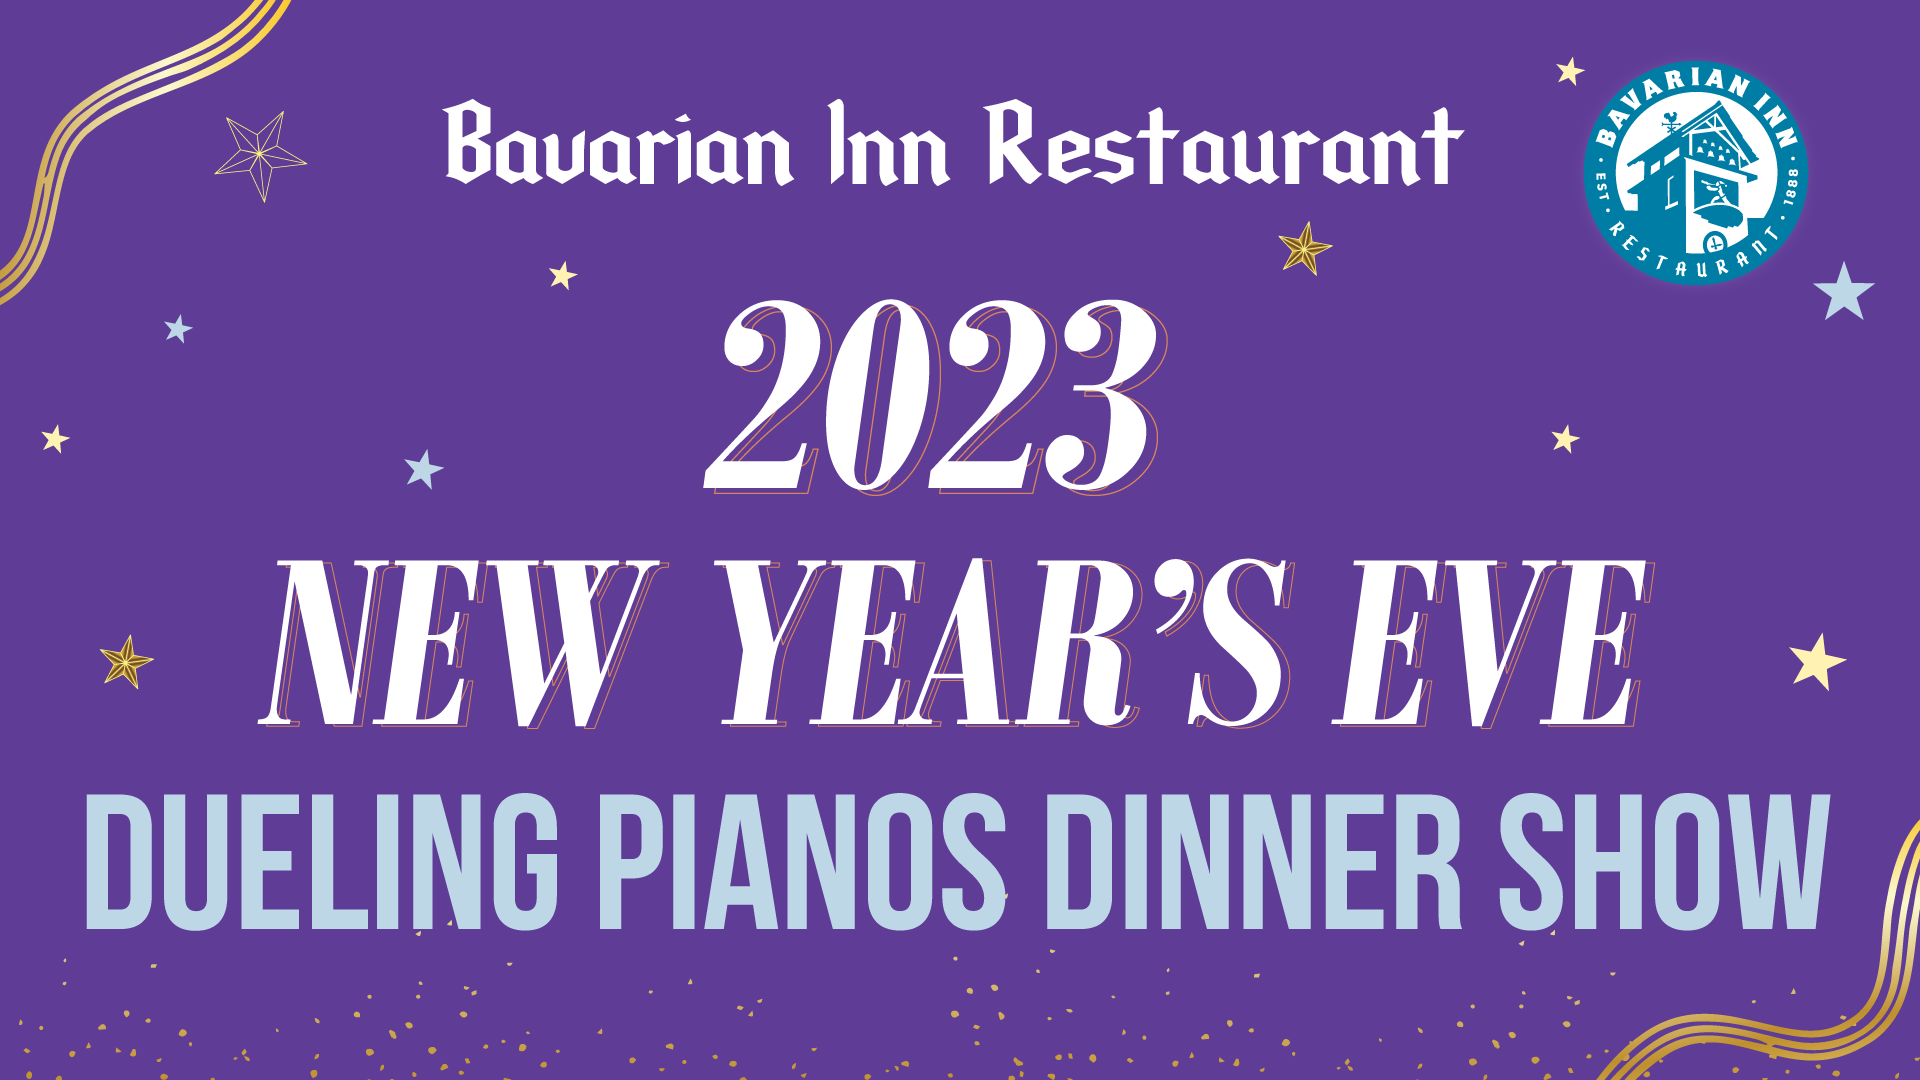 New Year's Eve Dueling Pianos Dinner Show at the Bavarian Inn